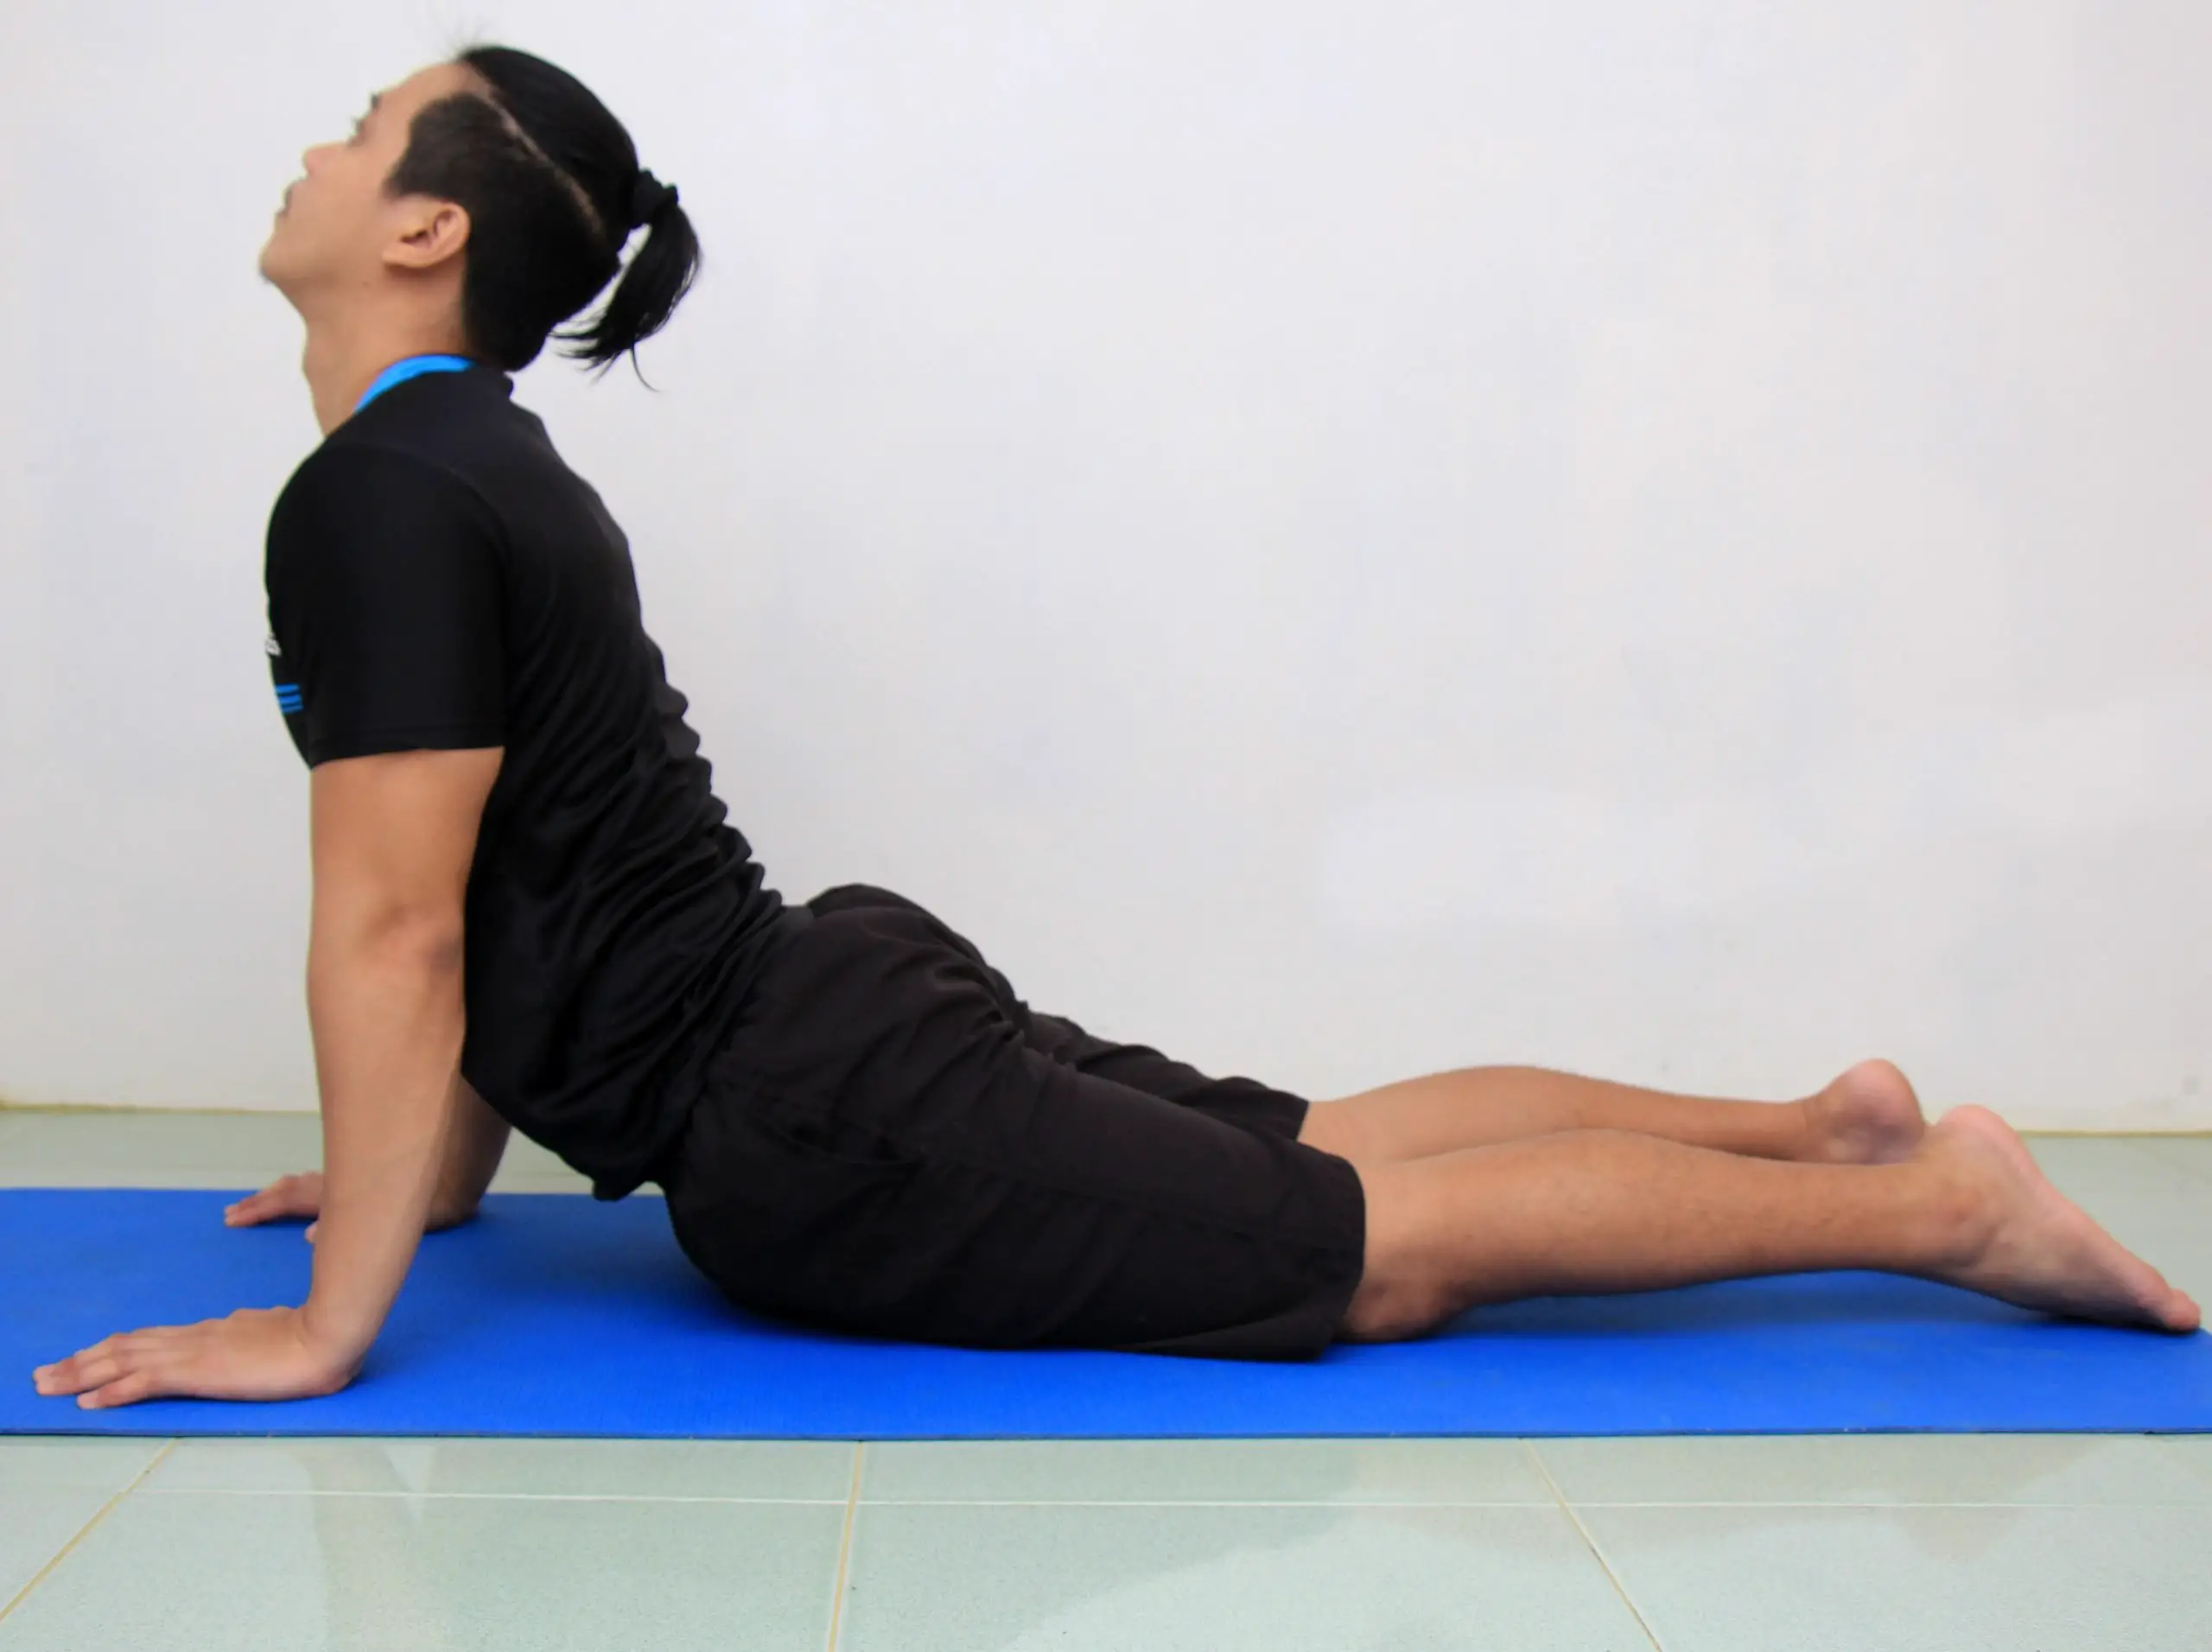 How to Relieve Lower Back Pain Through Stretching (with Pictures)